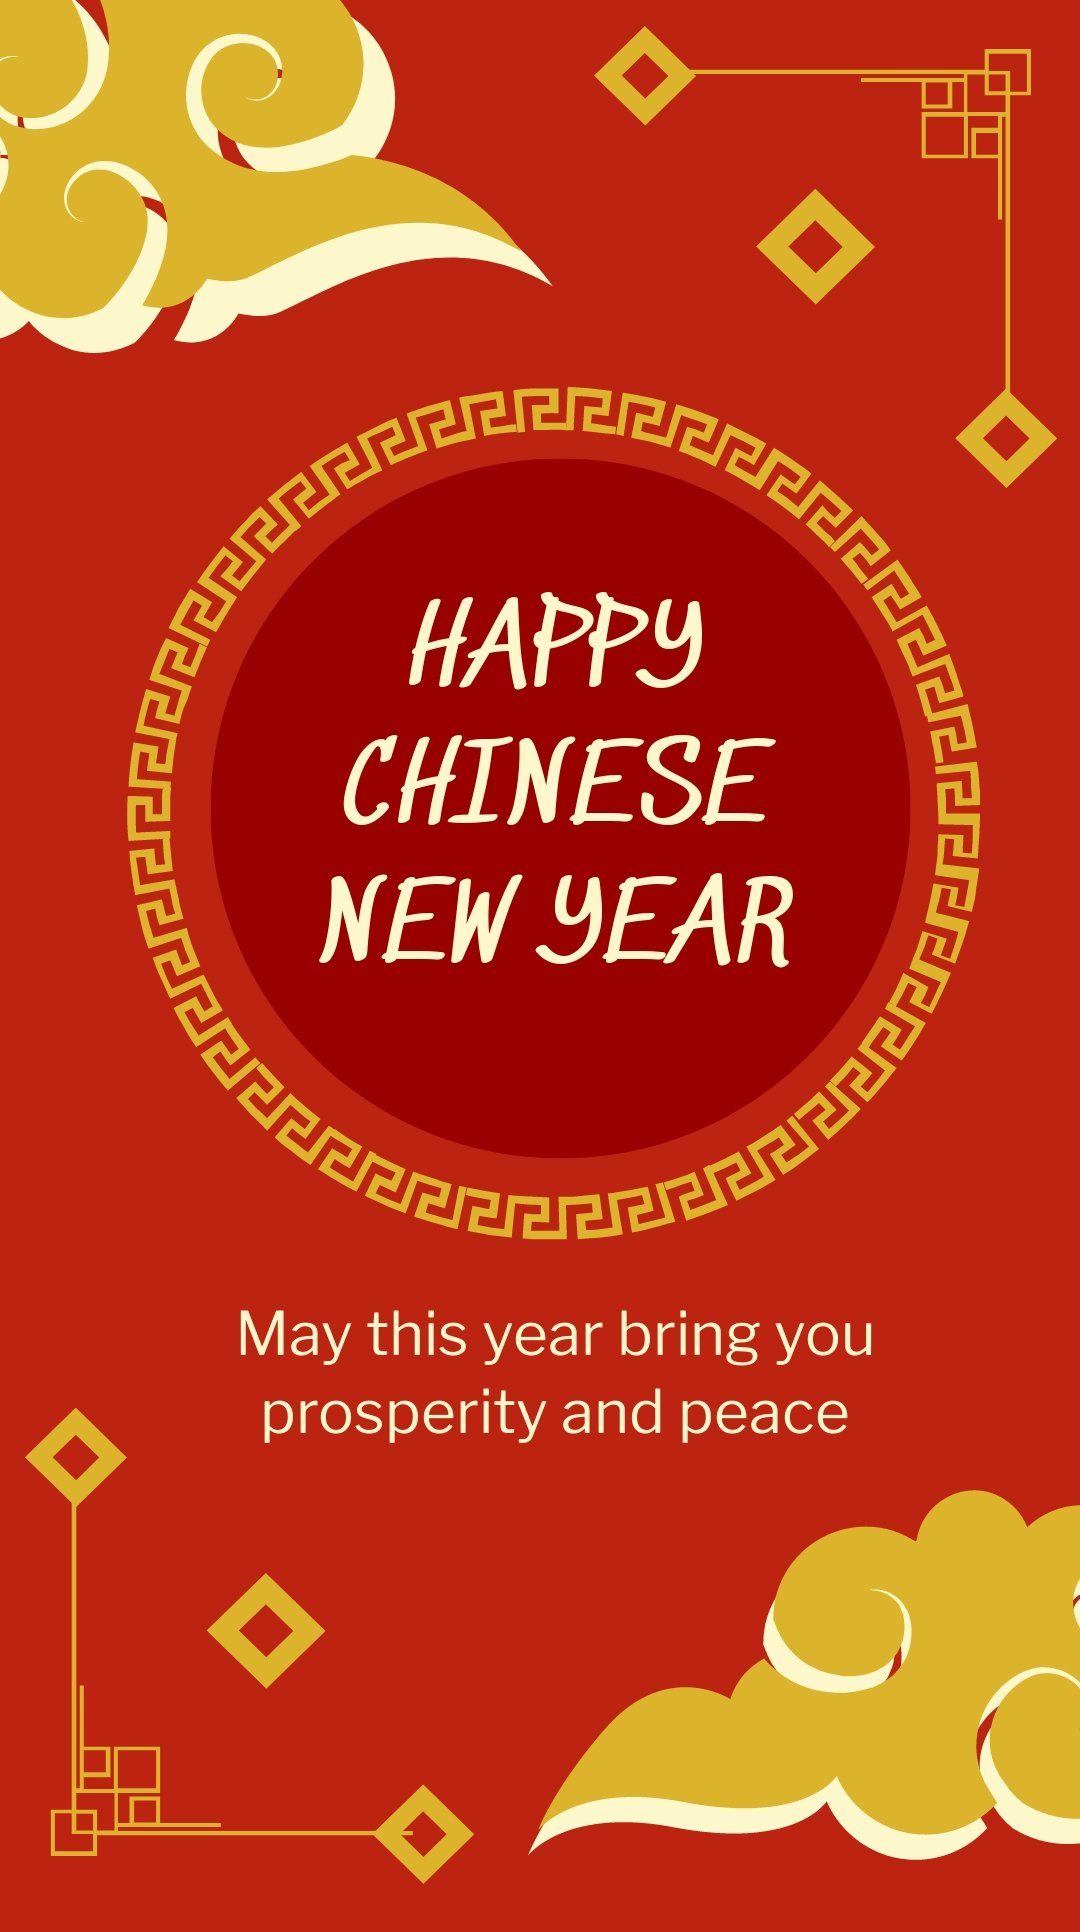 Vintage Chinese New Year Whatsapp Post